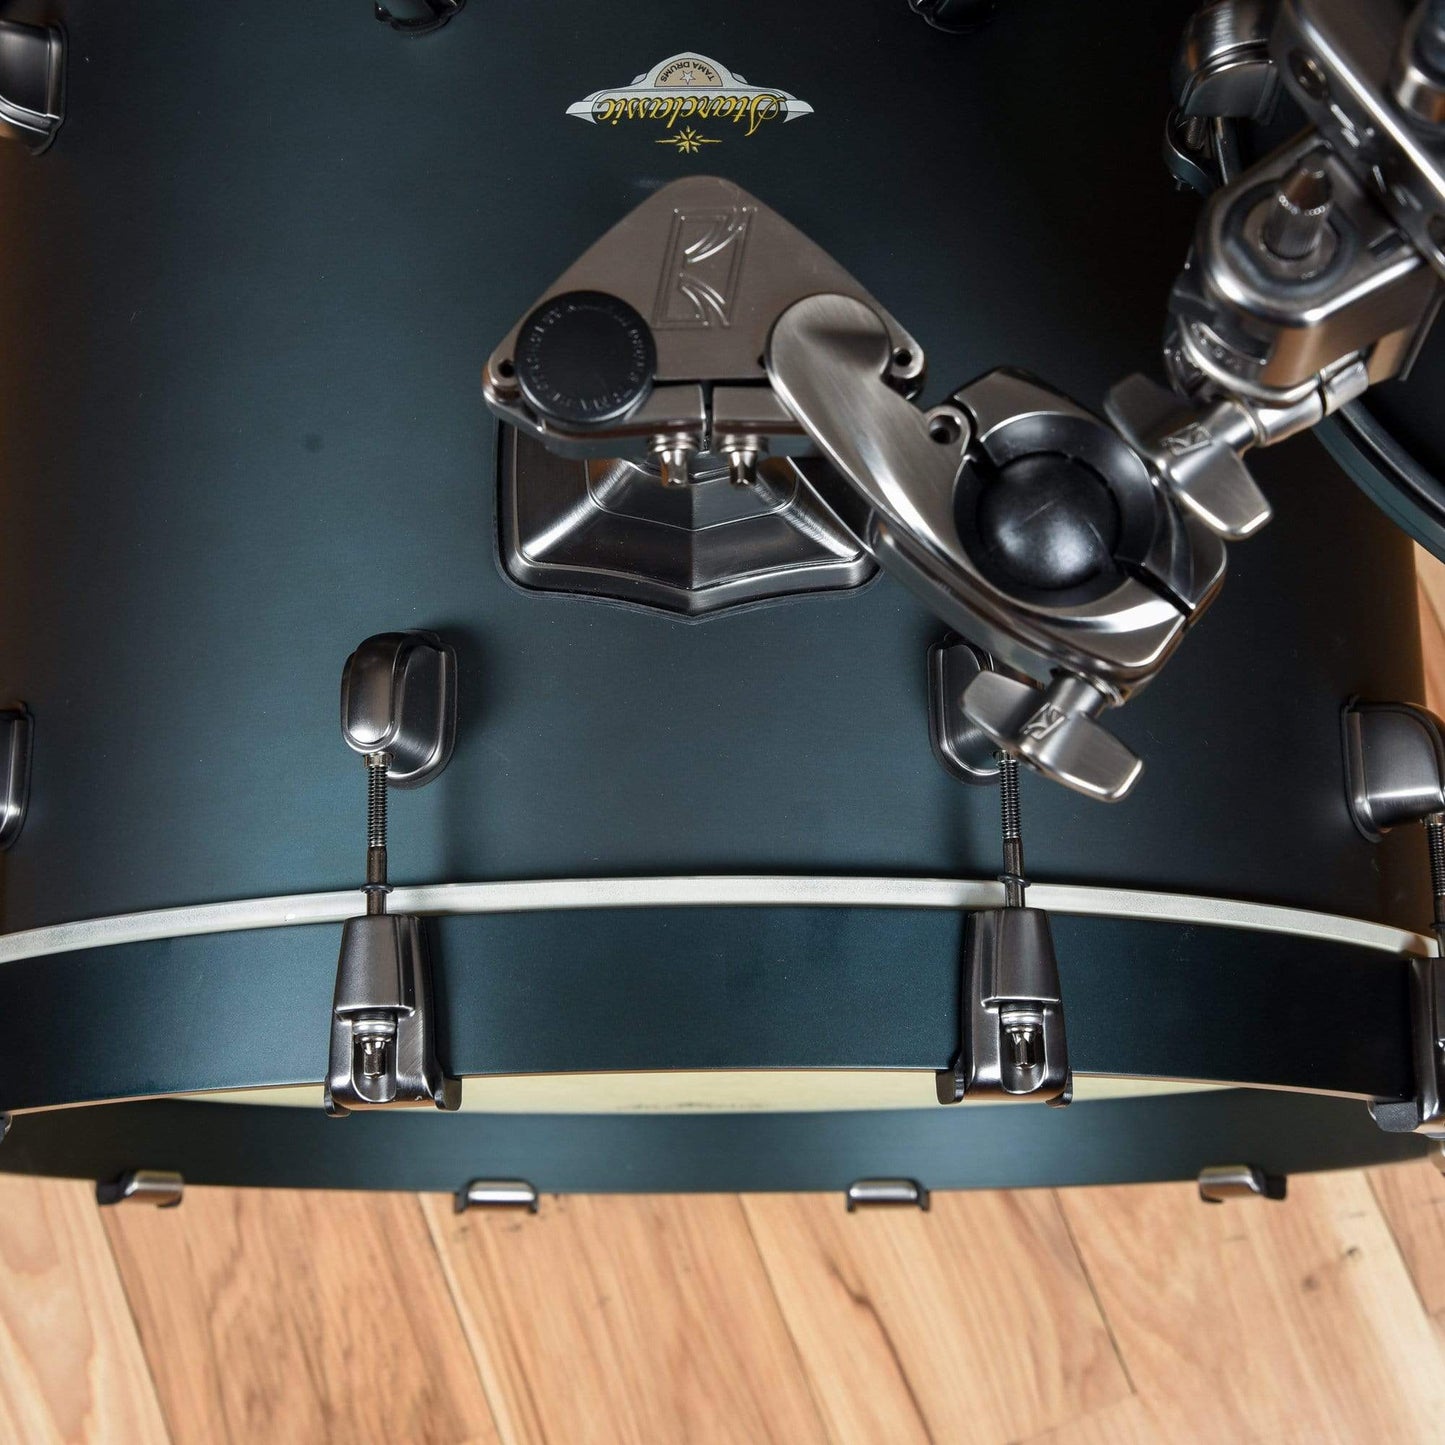 Tama Starclassic 12/14/20 3pc. Maple Drum Kit Flat Deep Green Metallic w/Smoked Black Nickel Hardware Drums and Percussion / Acoustic Drums / Full Acoustic Kits